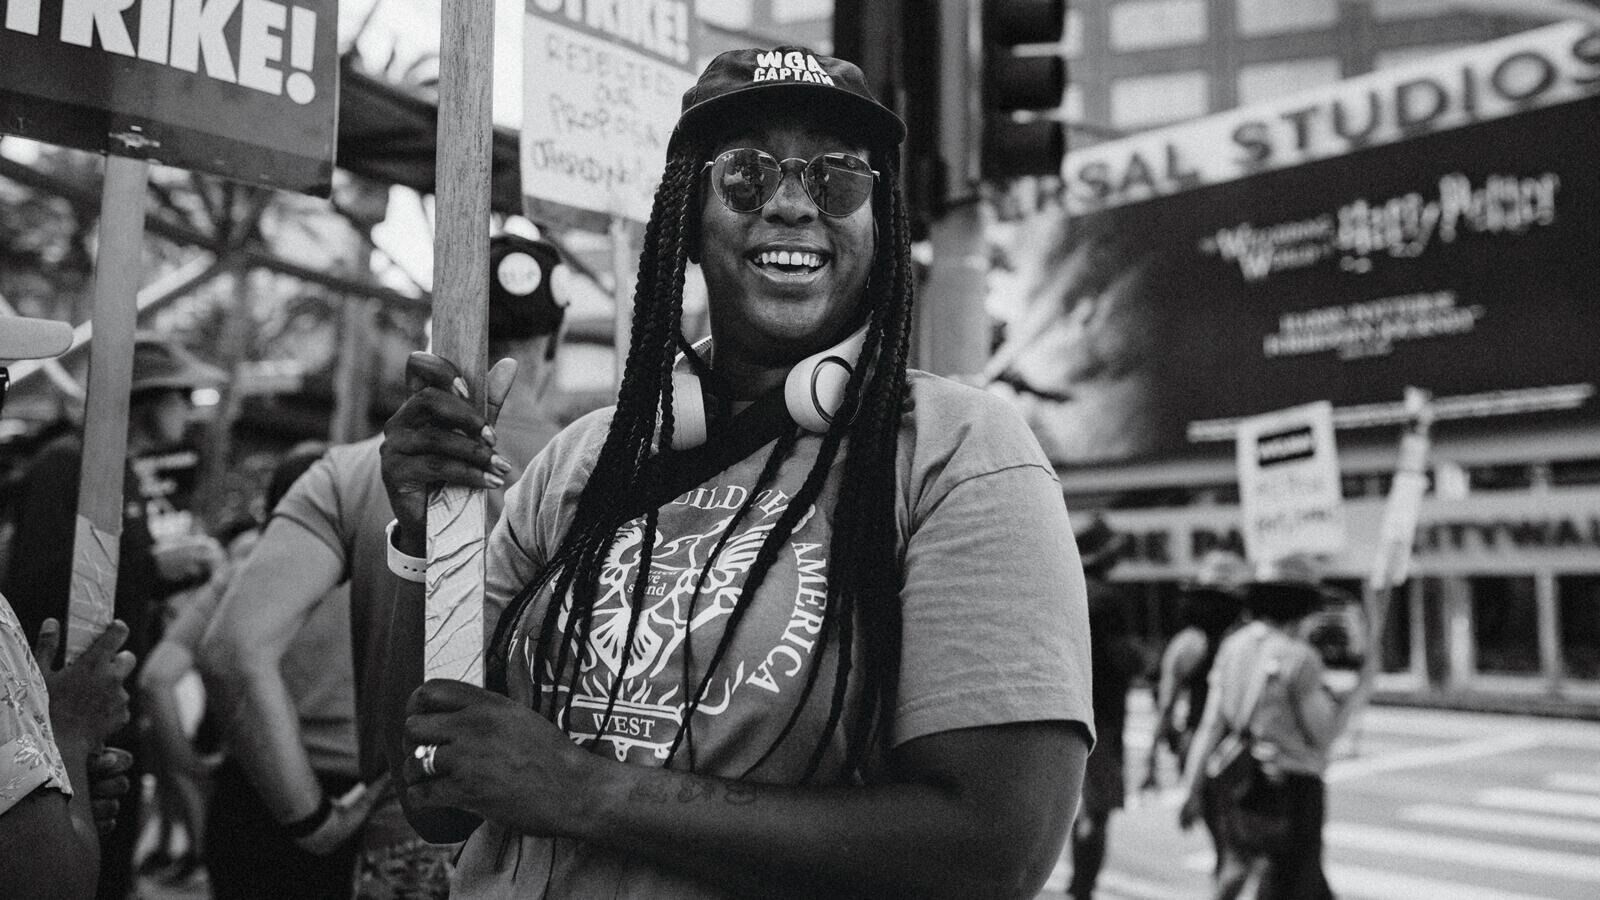 When lightning strikes: Meet the black women at the forefront of today's labor movement 